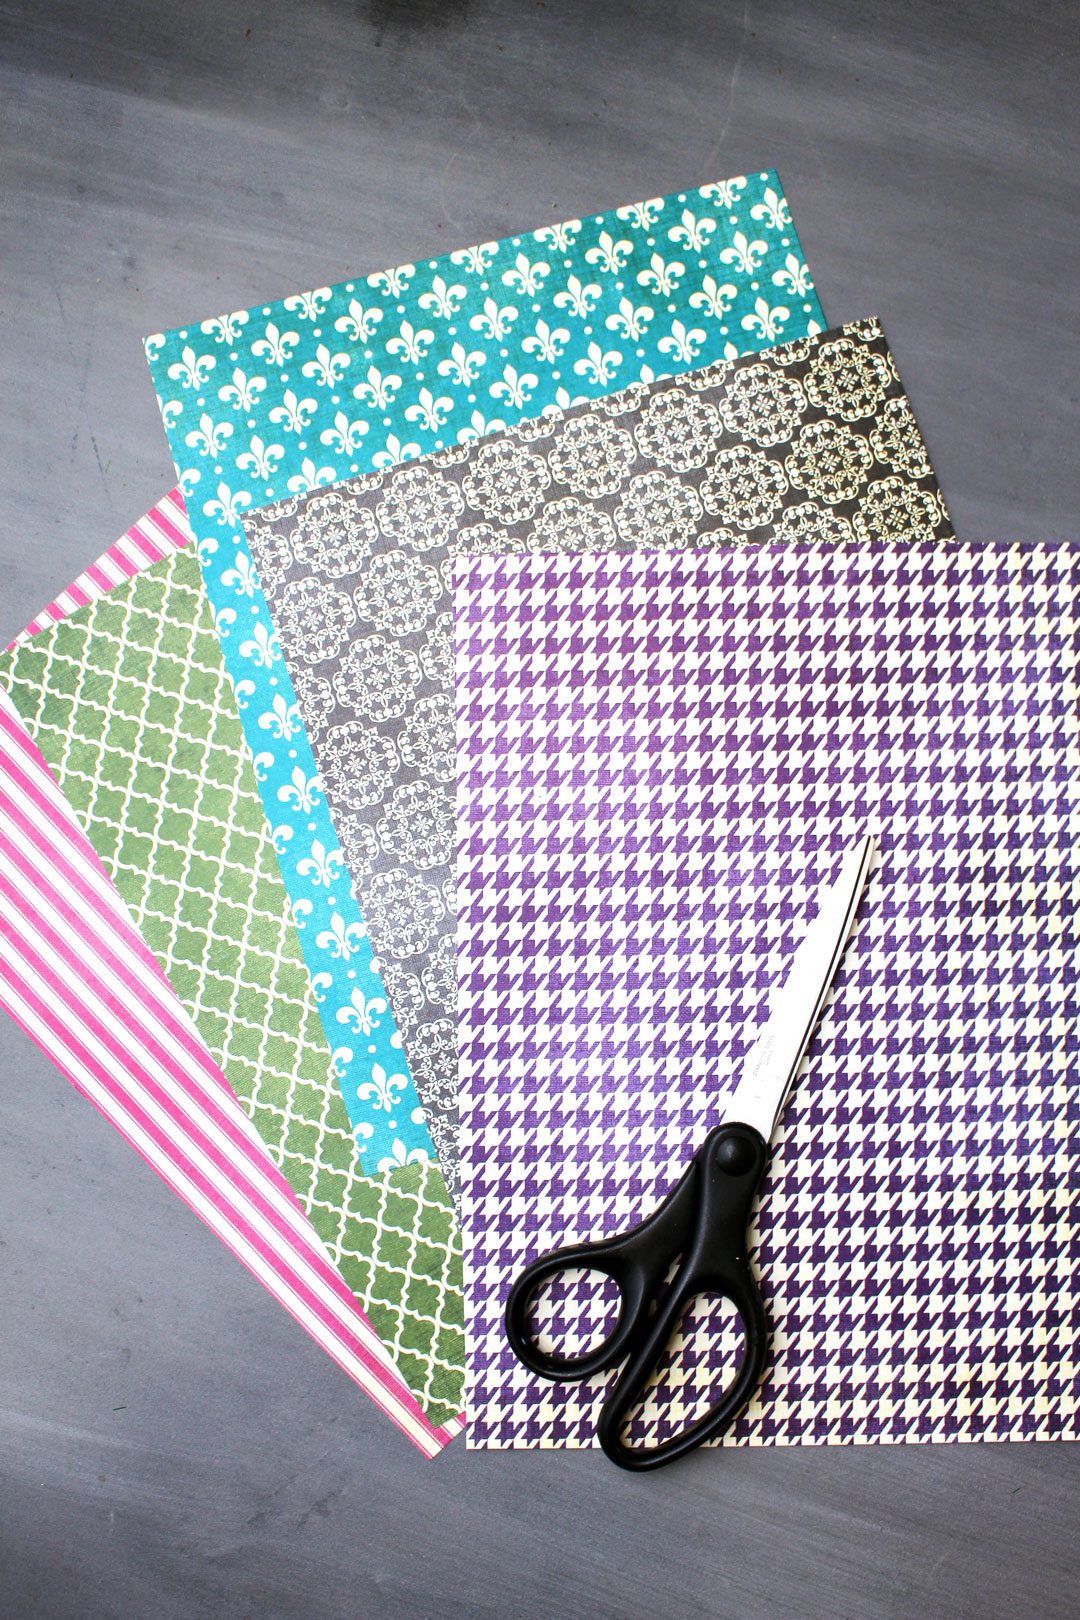 Pink, green, teal, black, and purple patterned pieces of scrapbook paper and a pair of scissors.